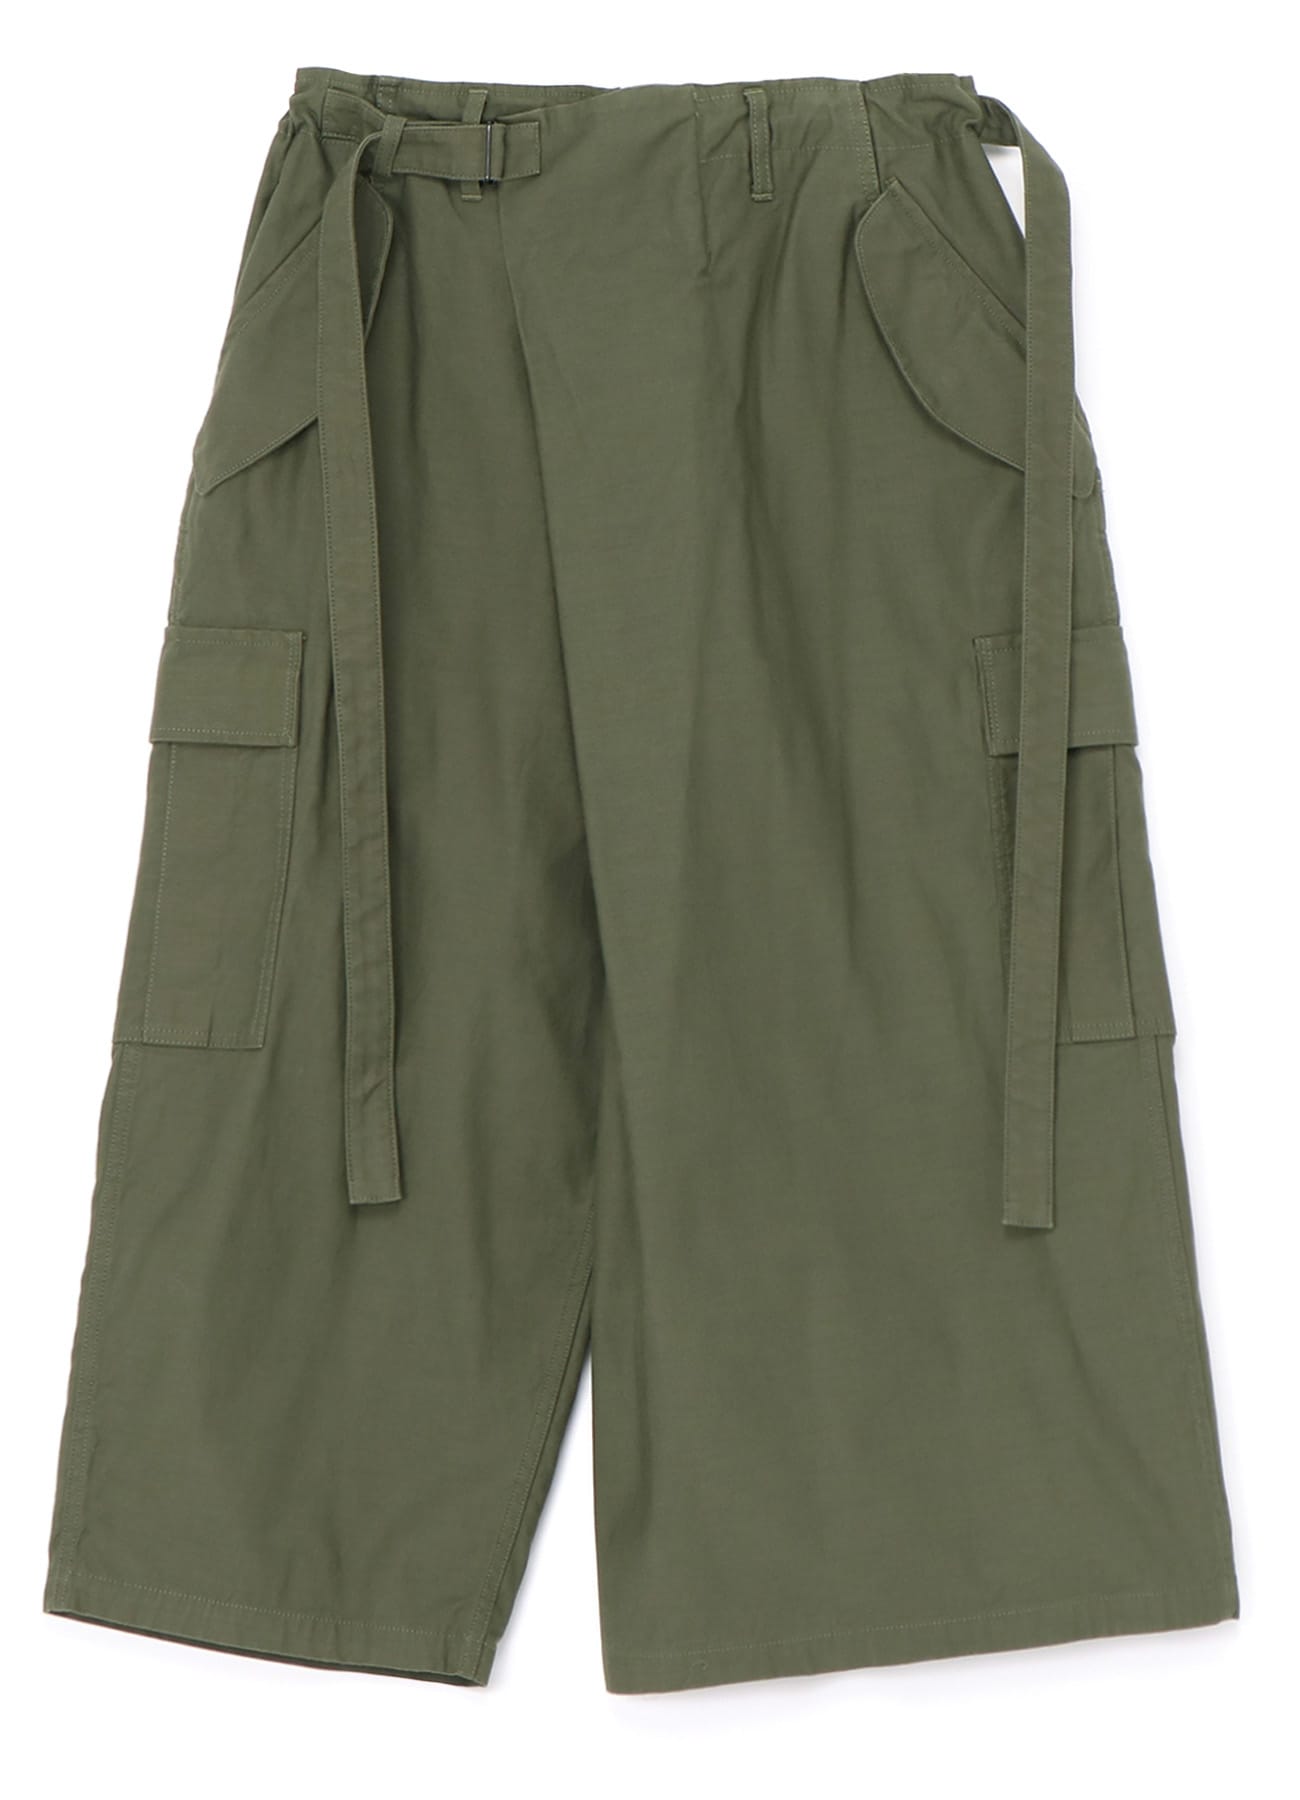 [Y's-Black Name]BACKSIDE SULFURIZATION SATIN WRAP PANTS WITH POCKETS